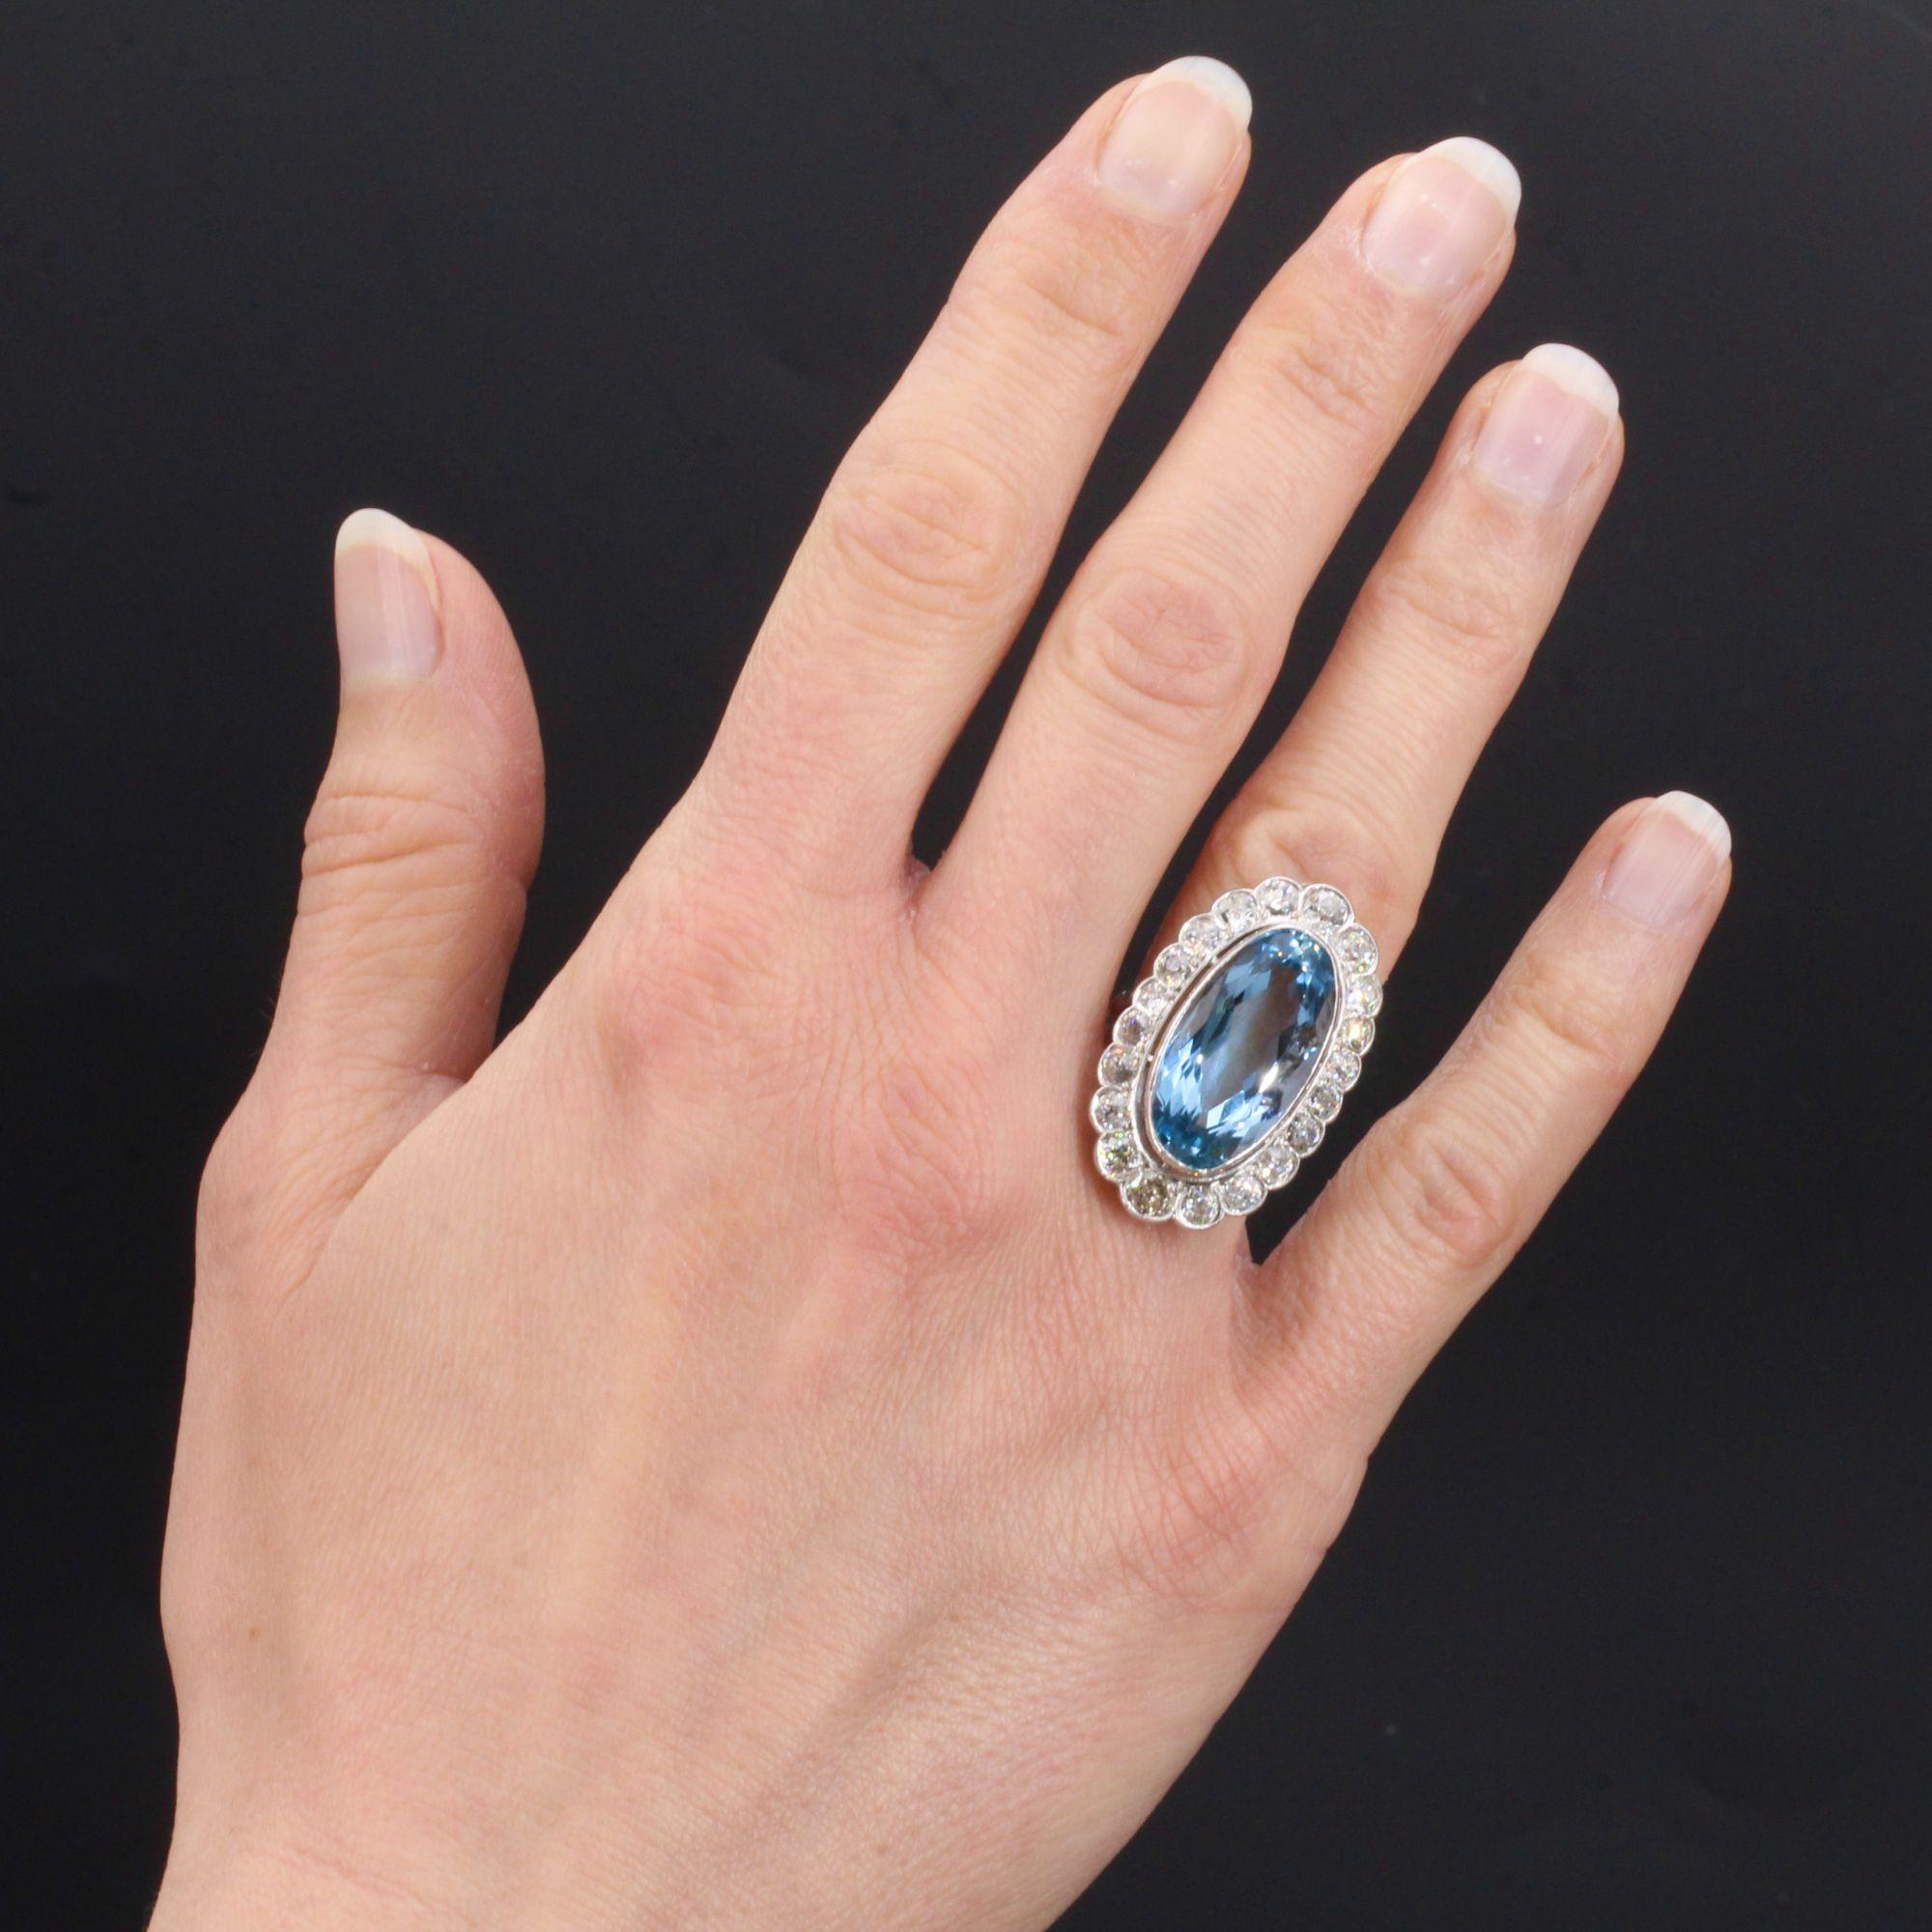 Ring in platinum.
Important antique pompadour ring, it is set with an oval aquamarine of a deep blue in a surround of antique cushion-cut diamonds, all in millegrain setting. The basket of this splendid antique aquamarine ring is made of volutes to